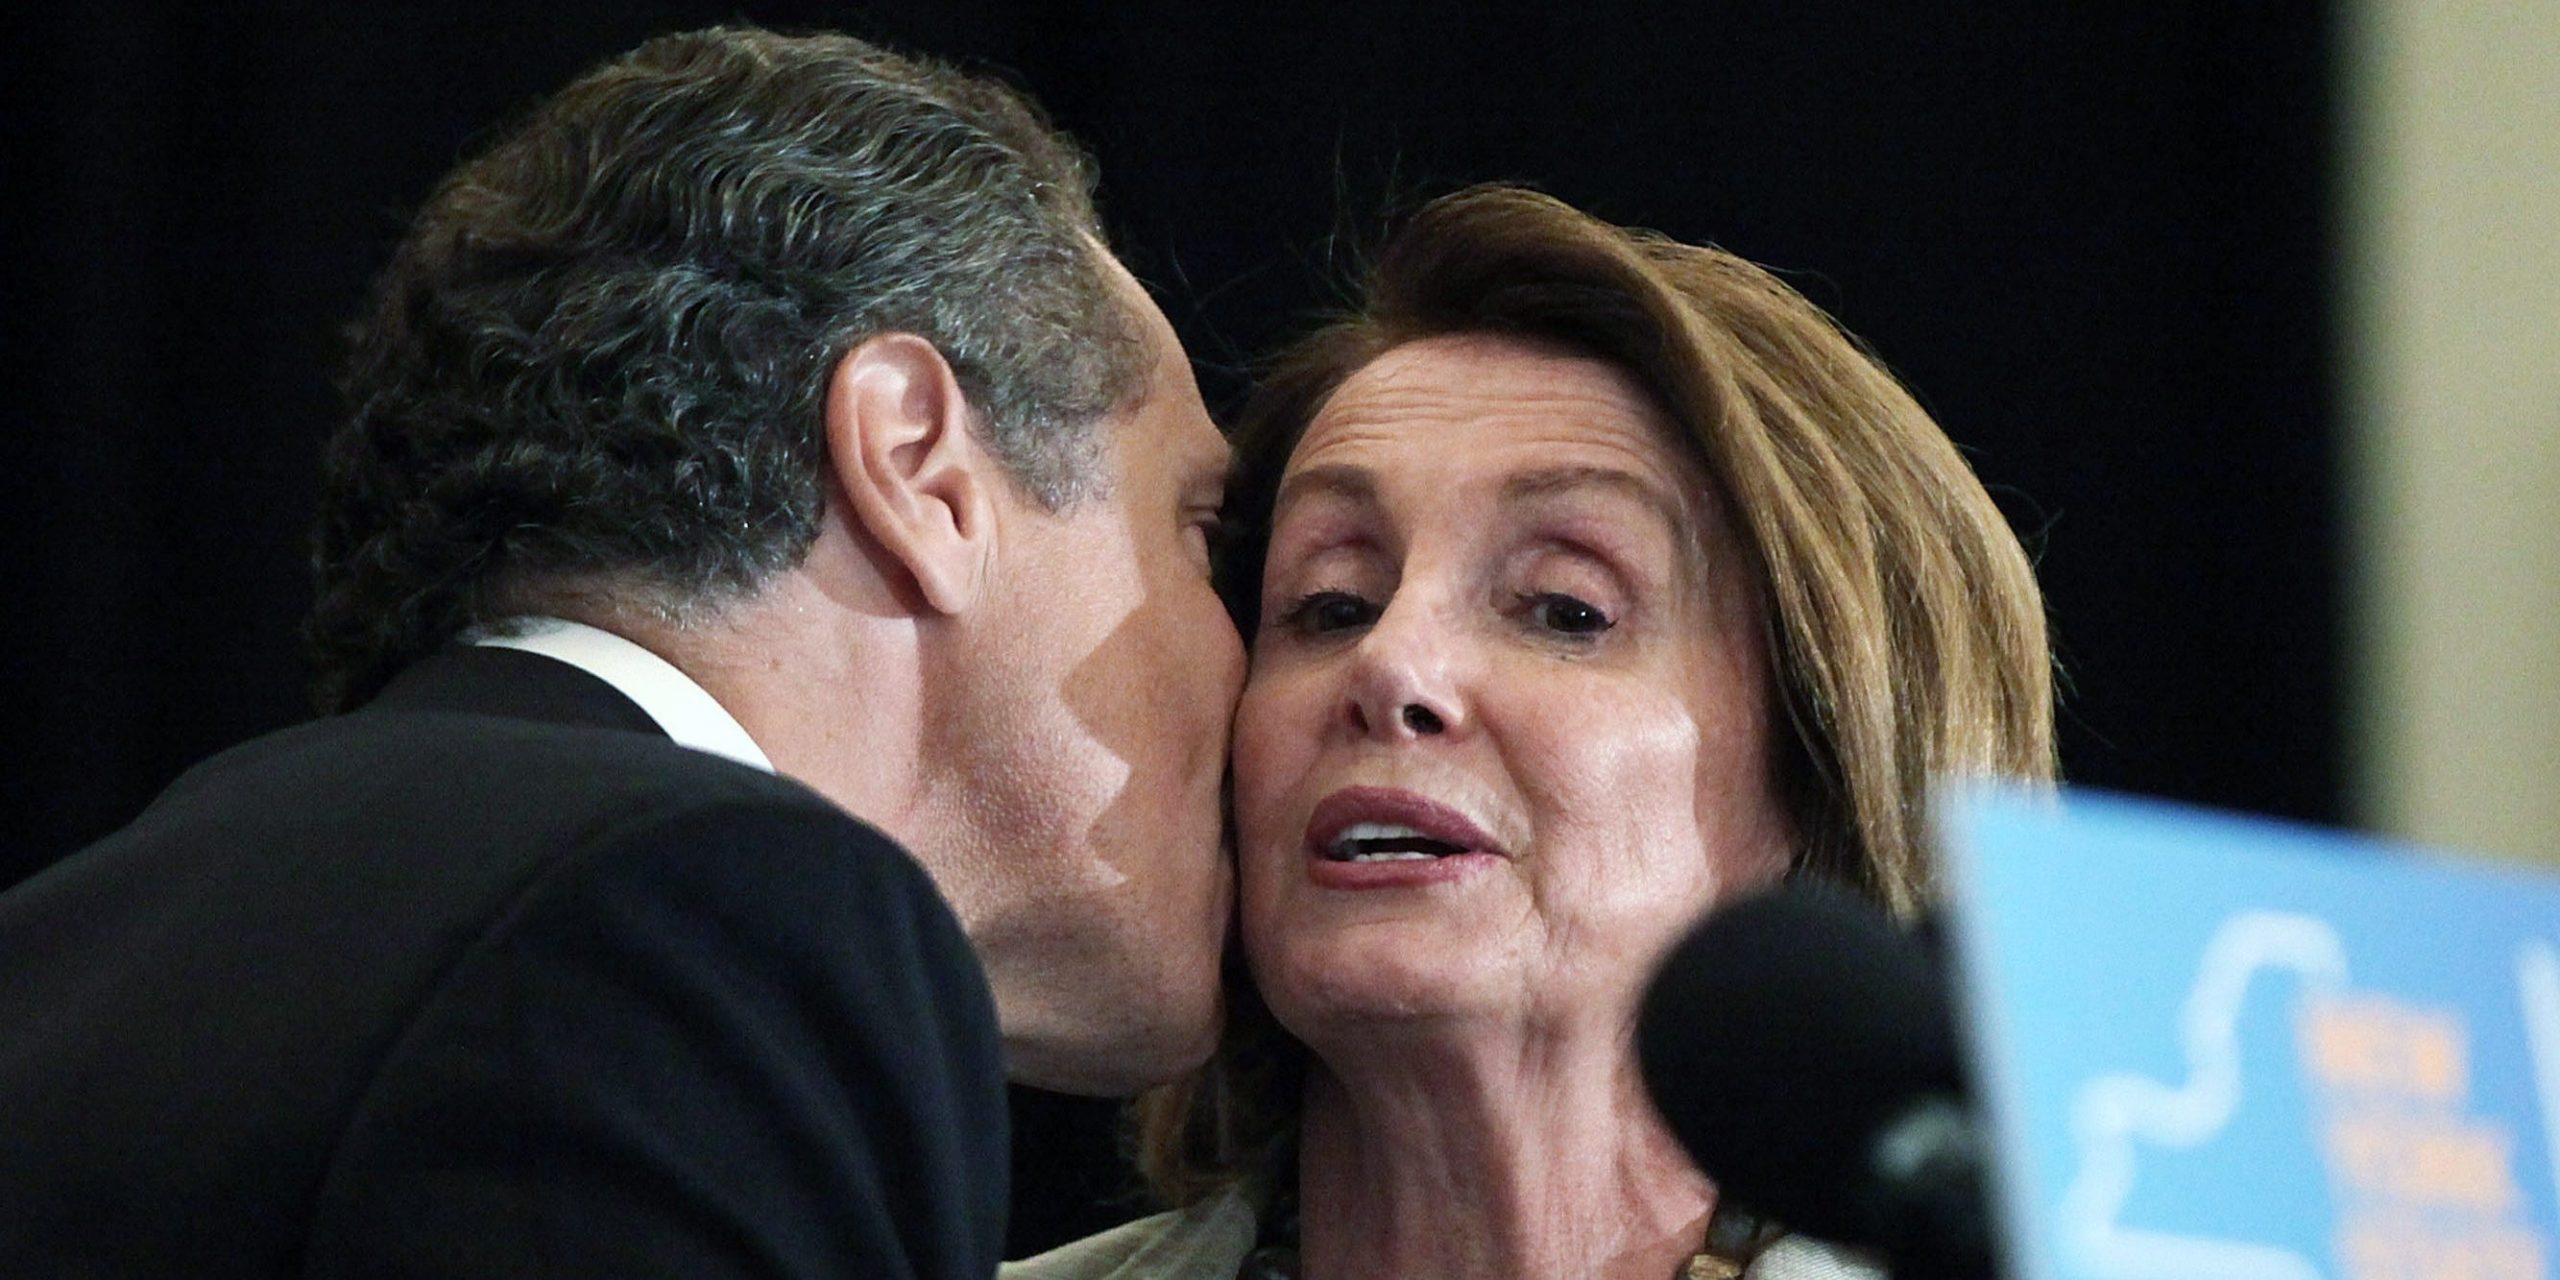 Andrew Cuomo greets Nancy Pelosi at an event at New York University where Cuomo signed into law a new affirmative sexual consent policy to combat campus sexual violence on July 7, 2015 in New York City.